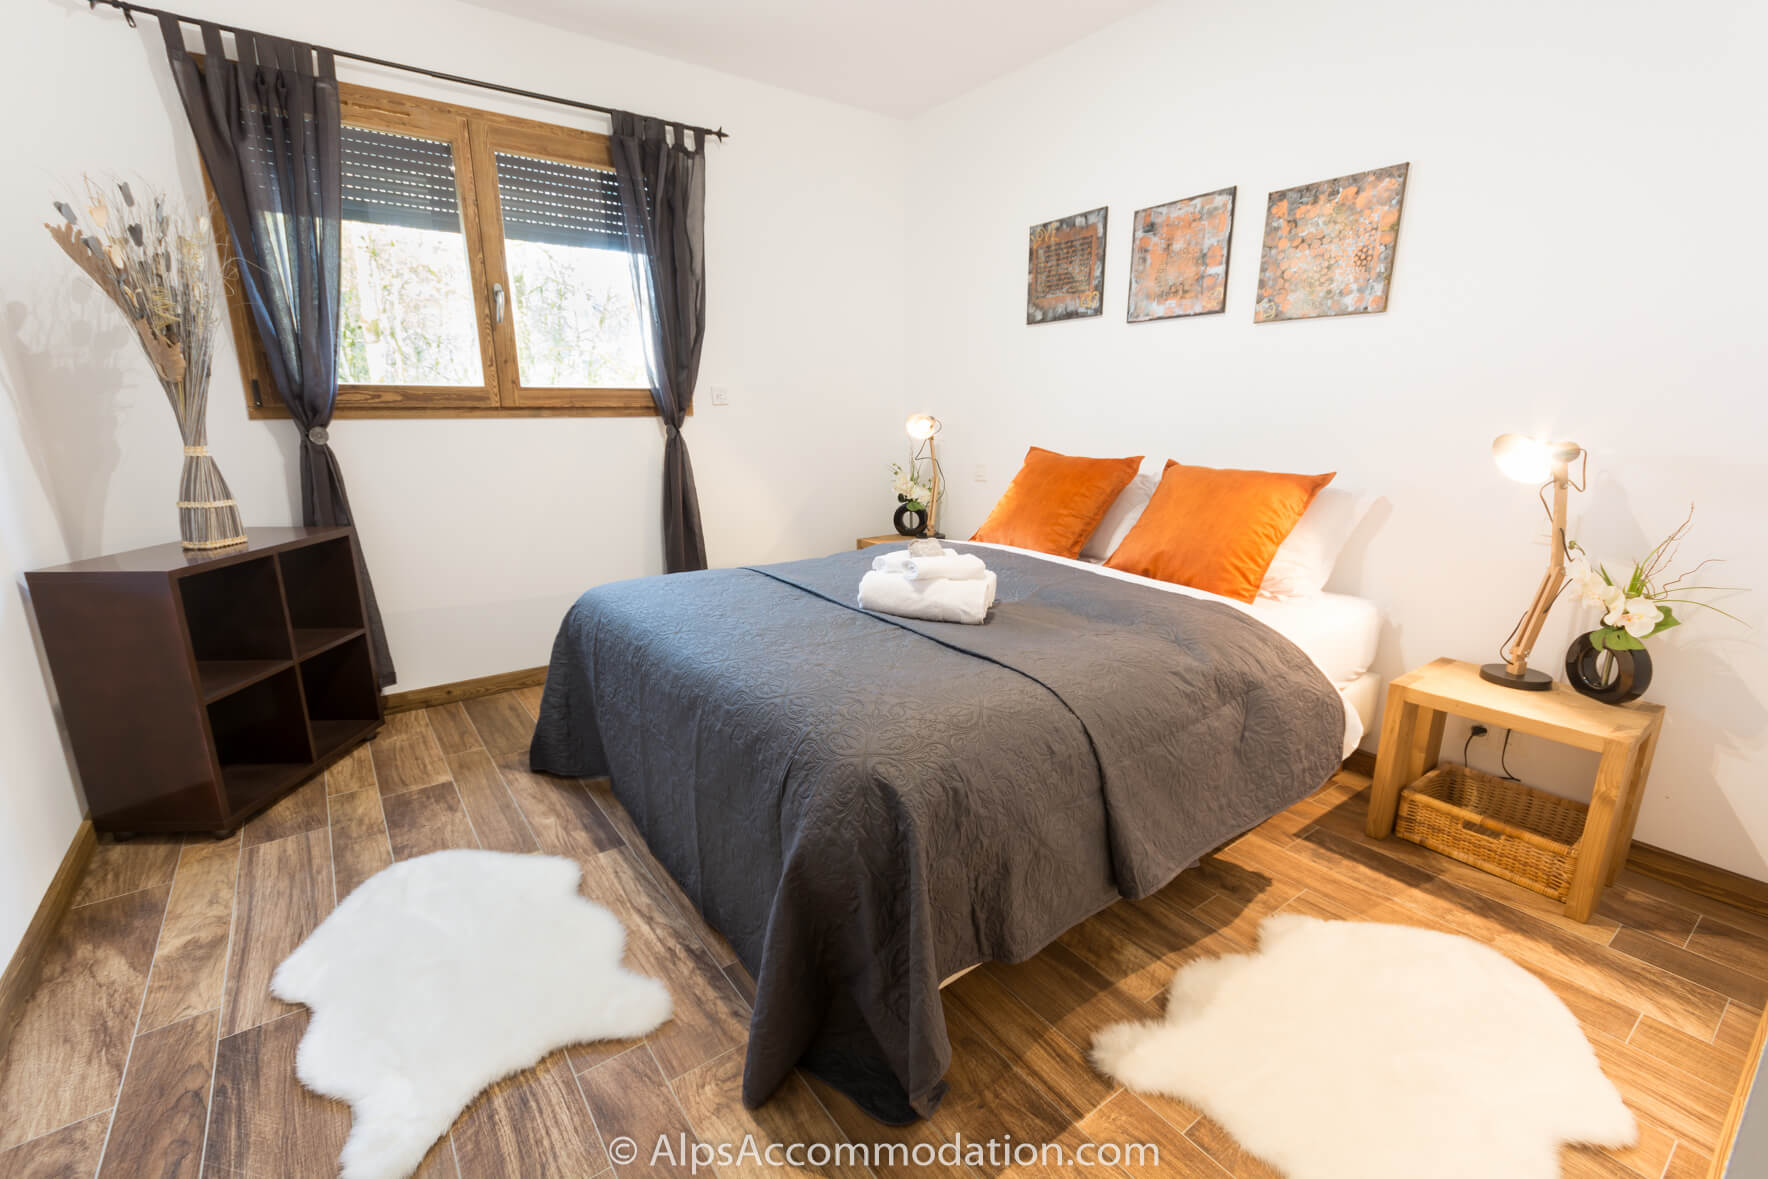 Chalet Sole Mio Morillon - Spacious ensuite bedroom on the lower level